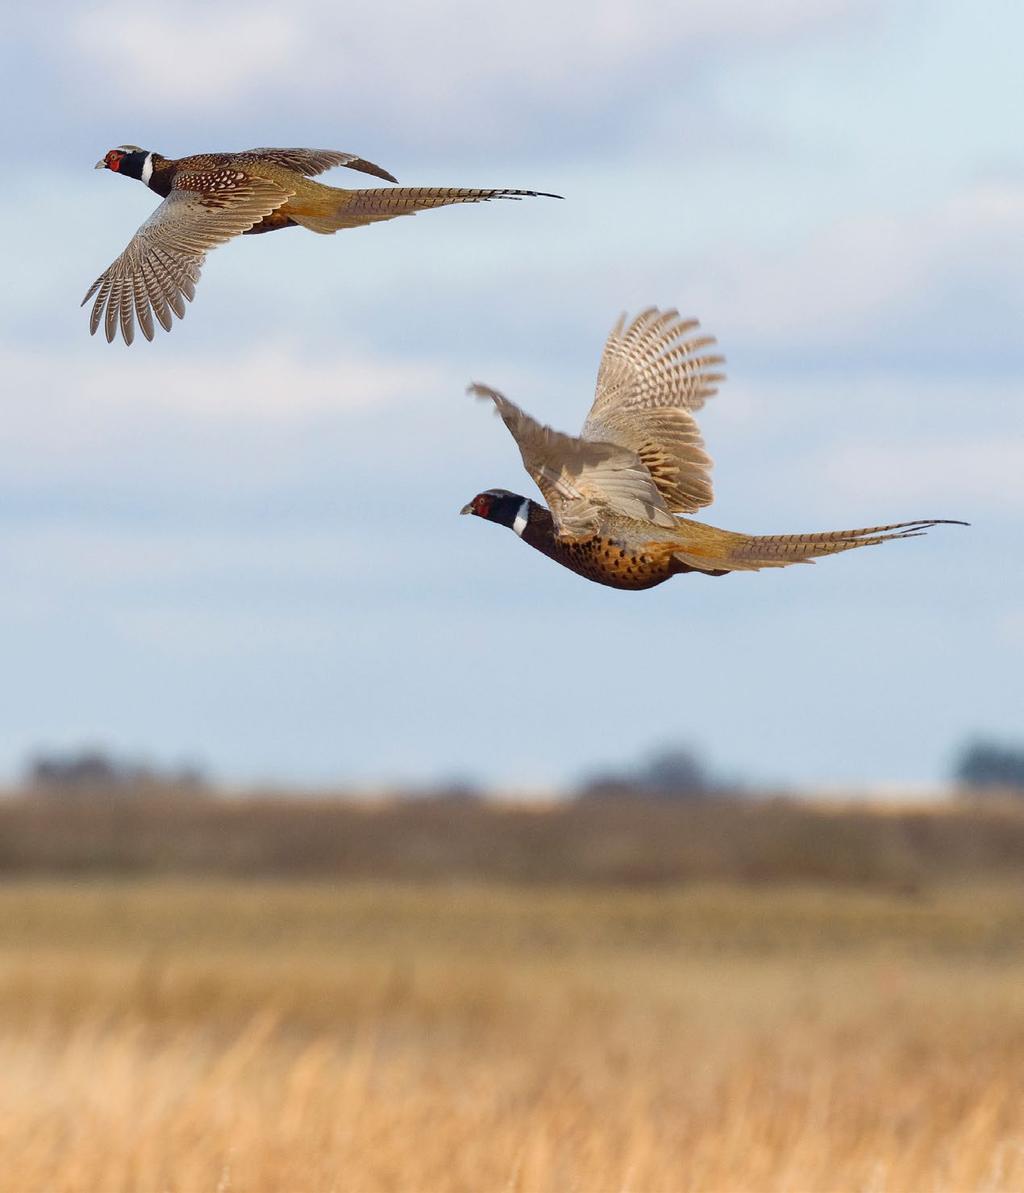 HUNTING & CONSERVATION T he riparian cover, pond and irrigated alfalfa field are prime habitat for a variety of game species. Waterfowl, upland and whitetail deer hunting on the ranch are outstanding.